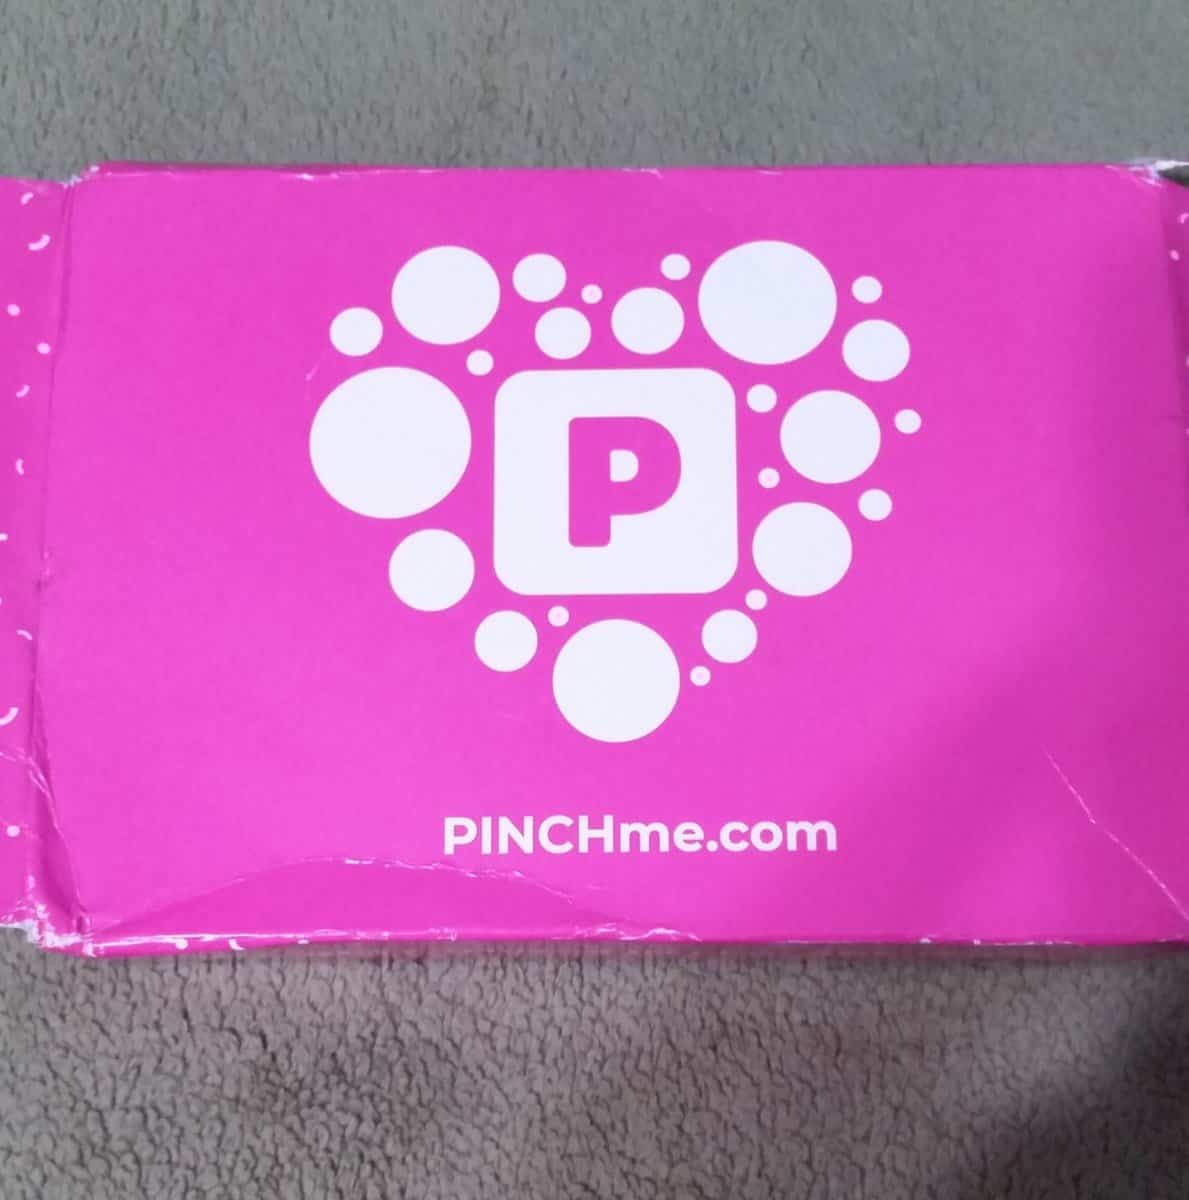 pinchme box. pink box with white bubles and square with a pink P in the center.